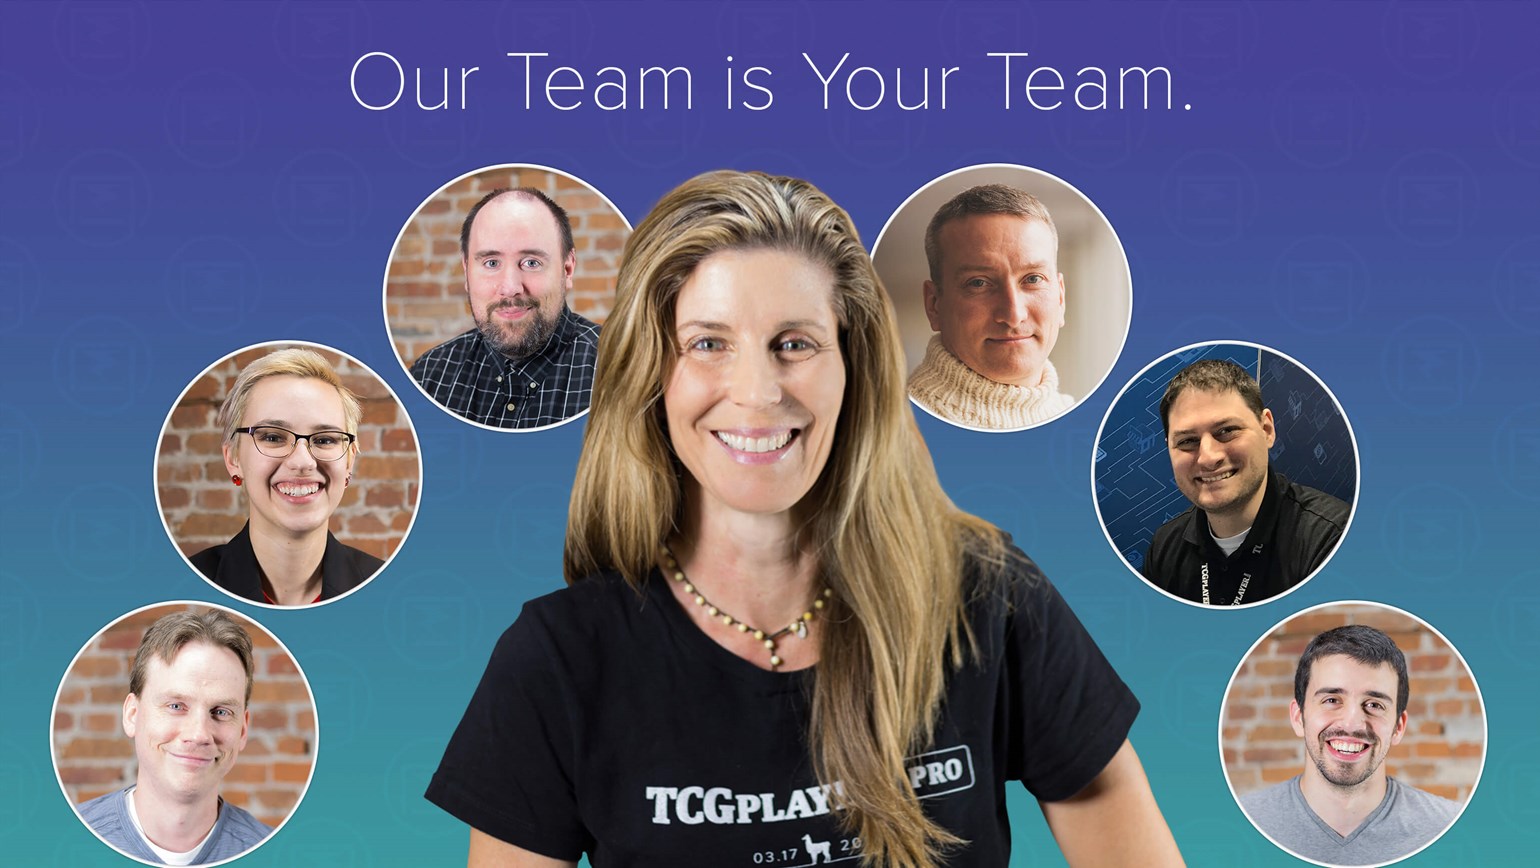 How the TCGplayer Customer Success Team Can Help You Streamline and Grow Your Business